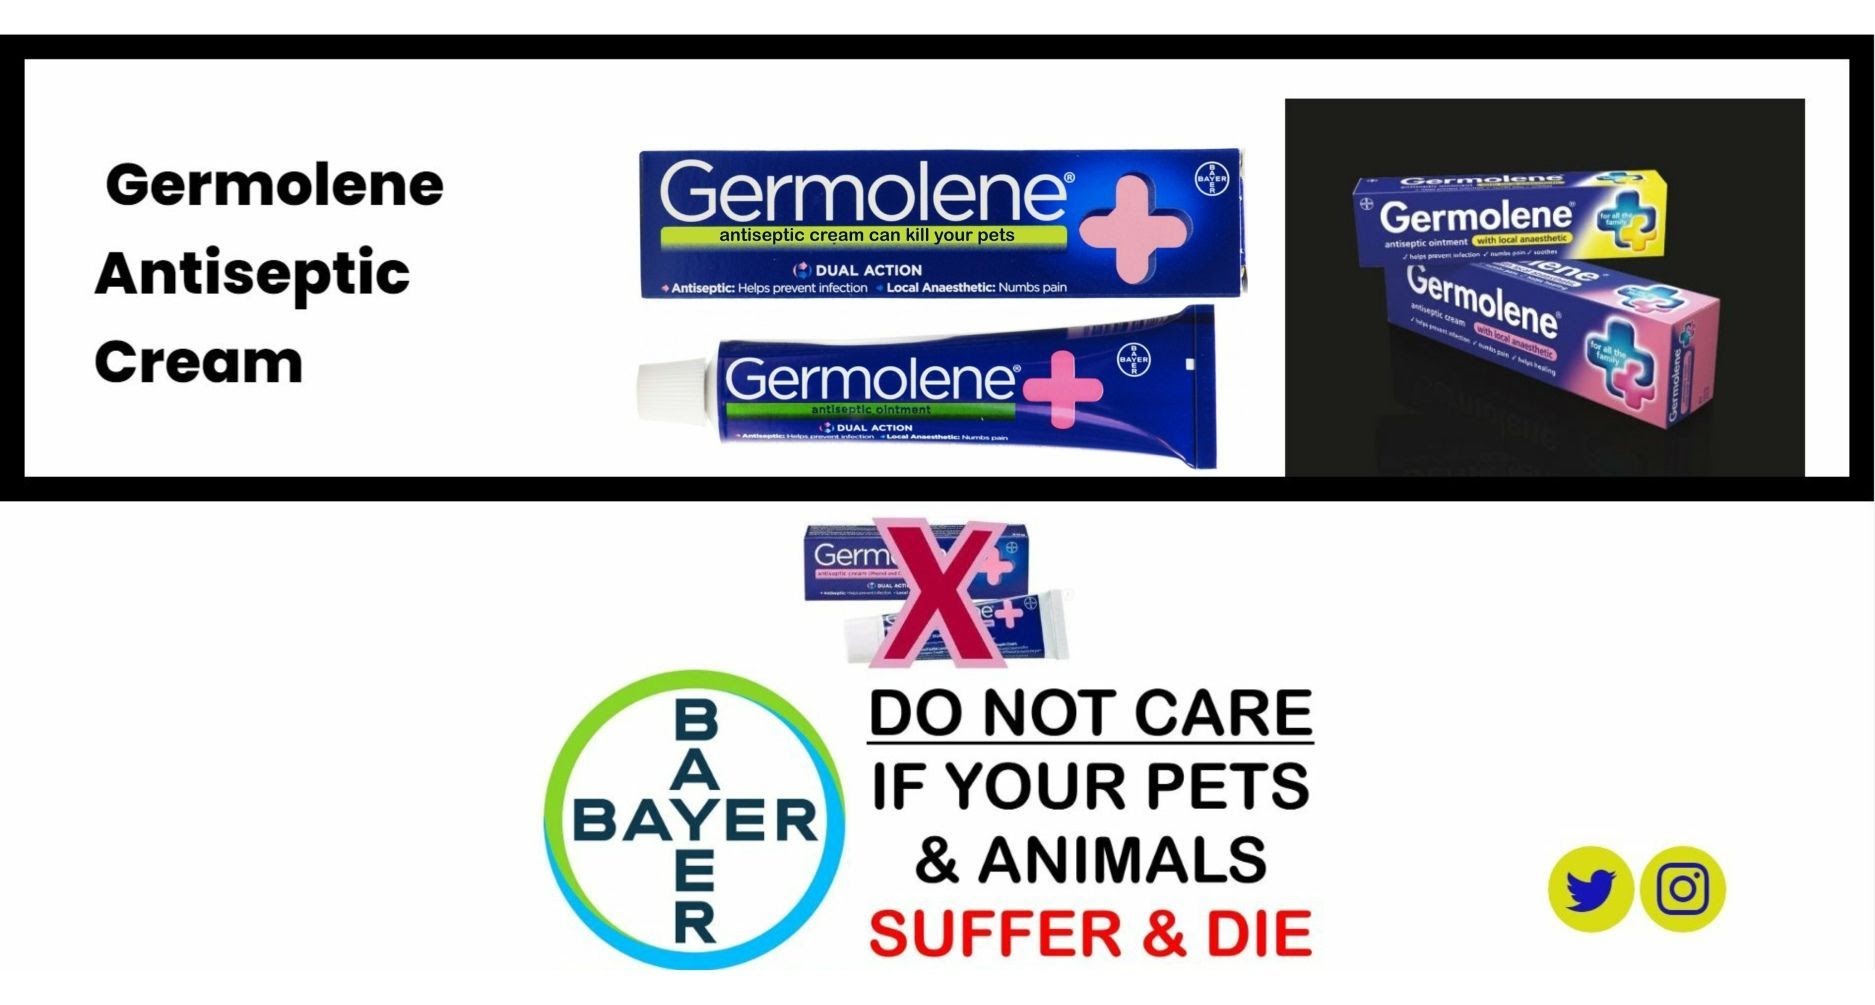 GERMOLENE CAN MAIM AND KILL YOUR PETS